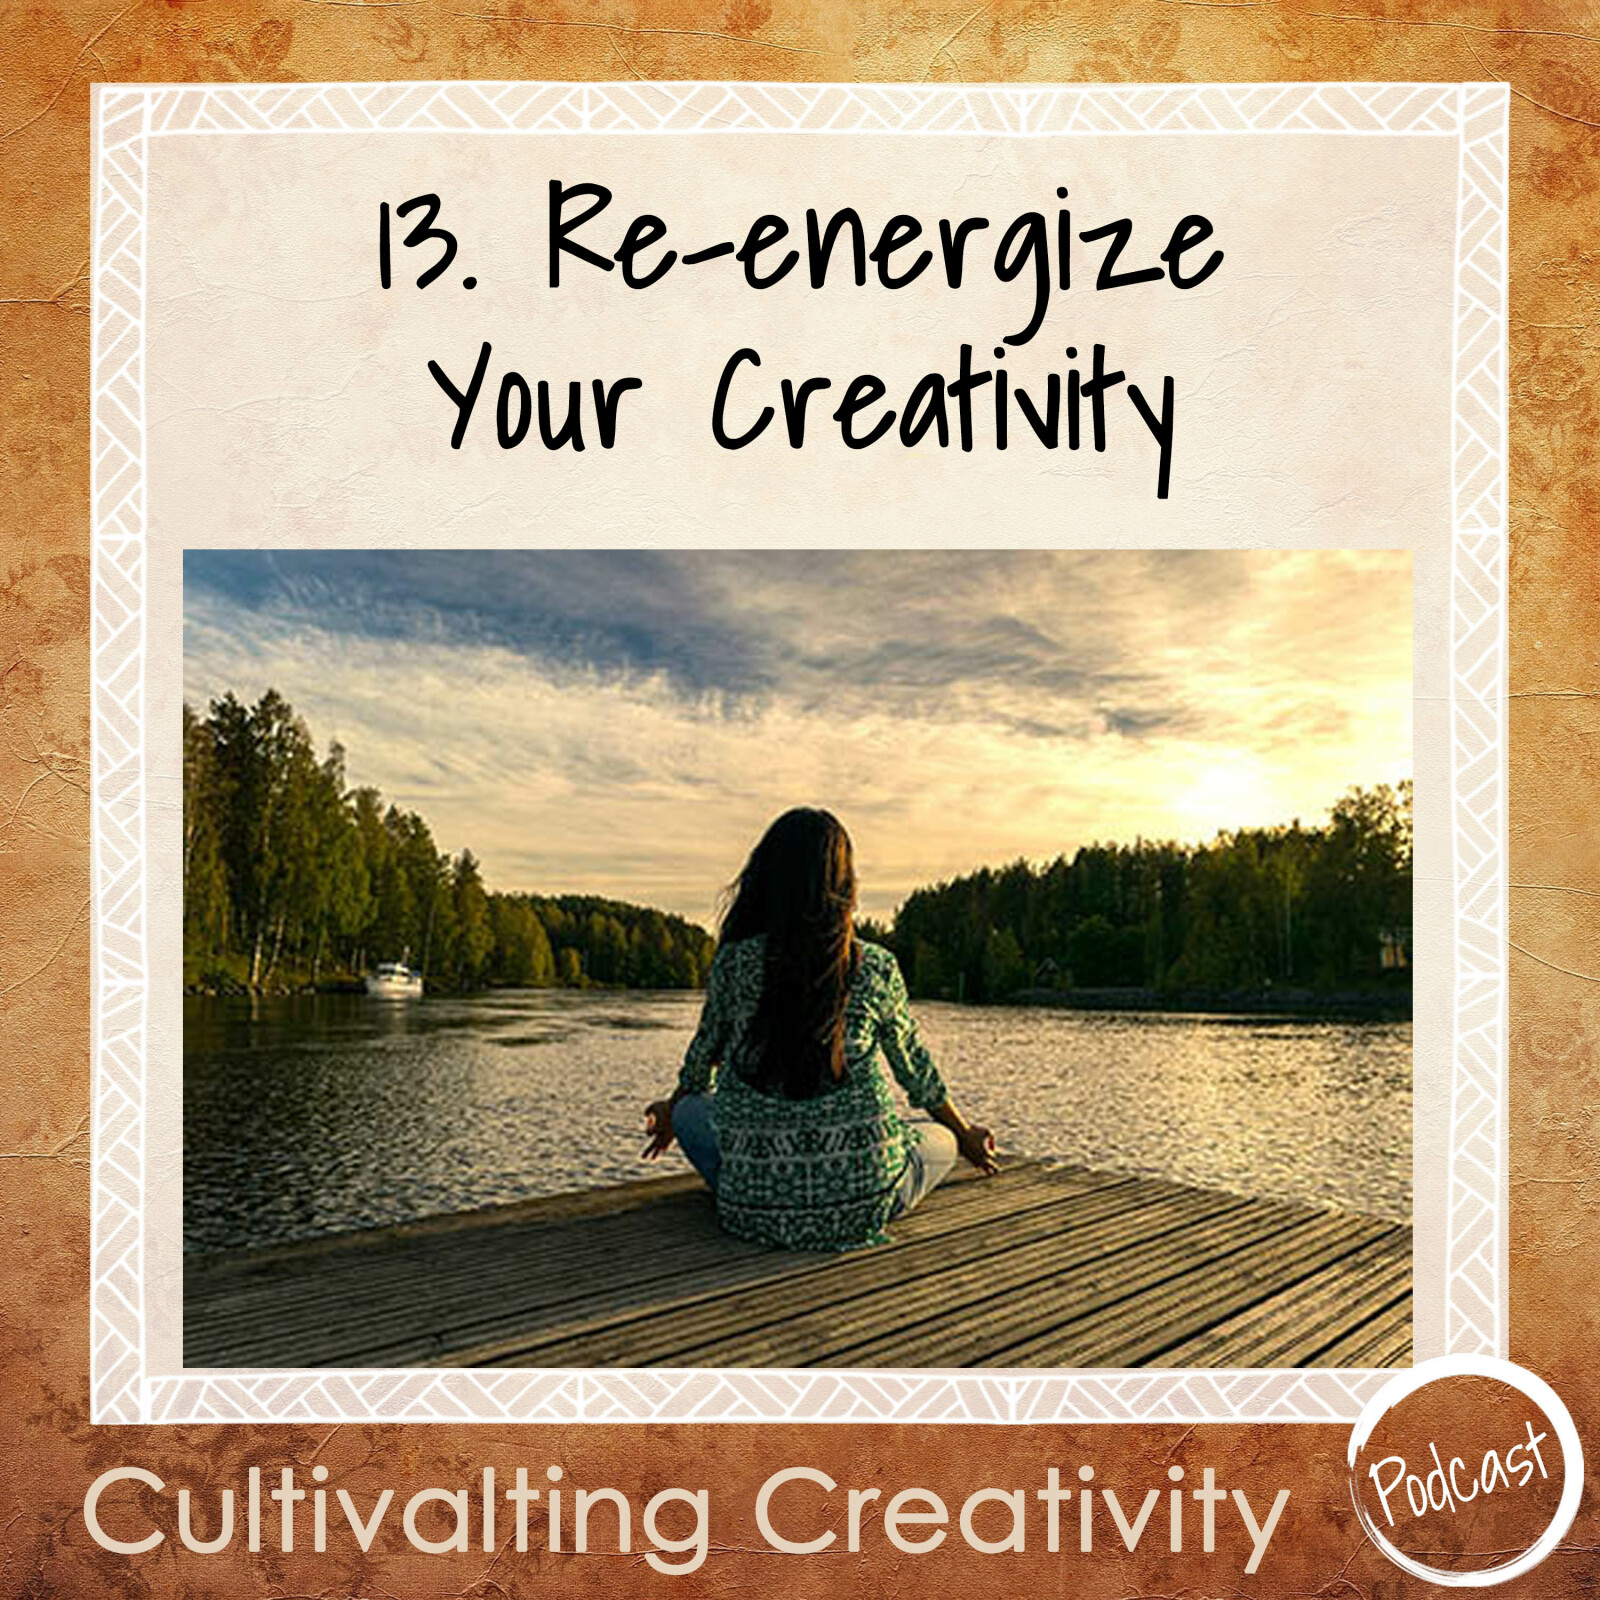 13. Re-energize Your Creativity